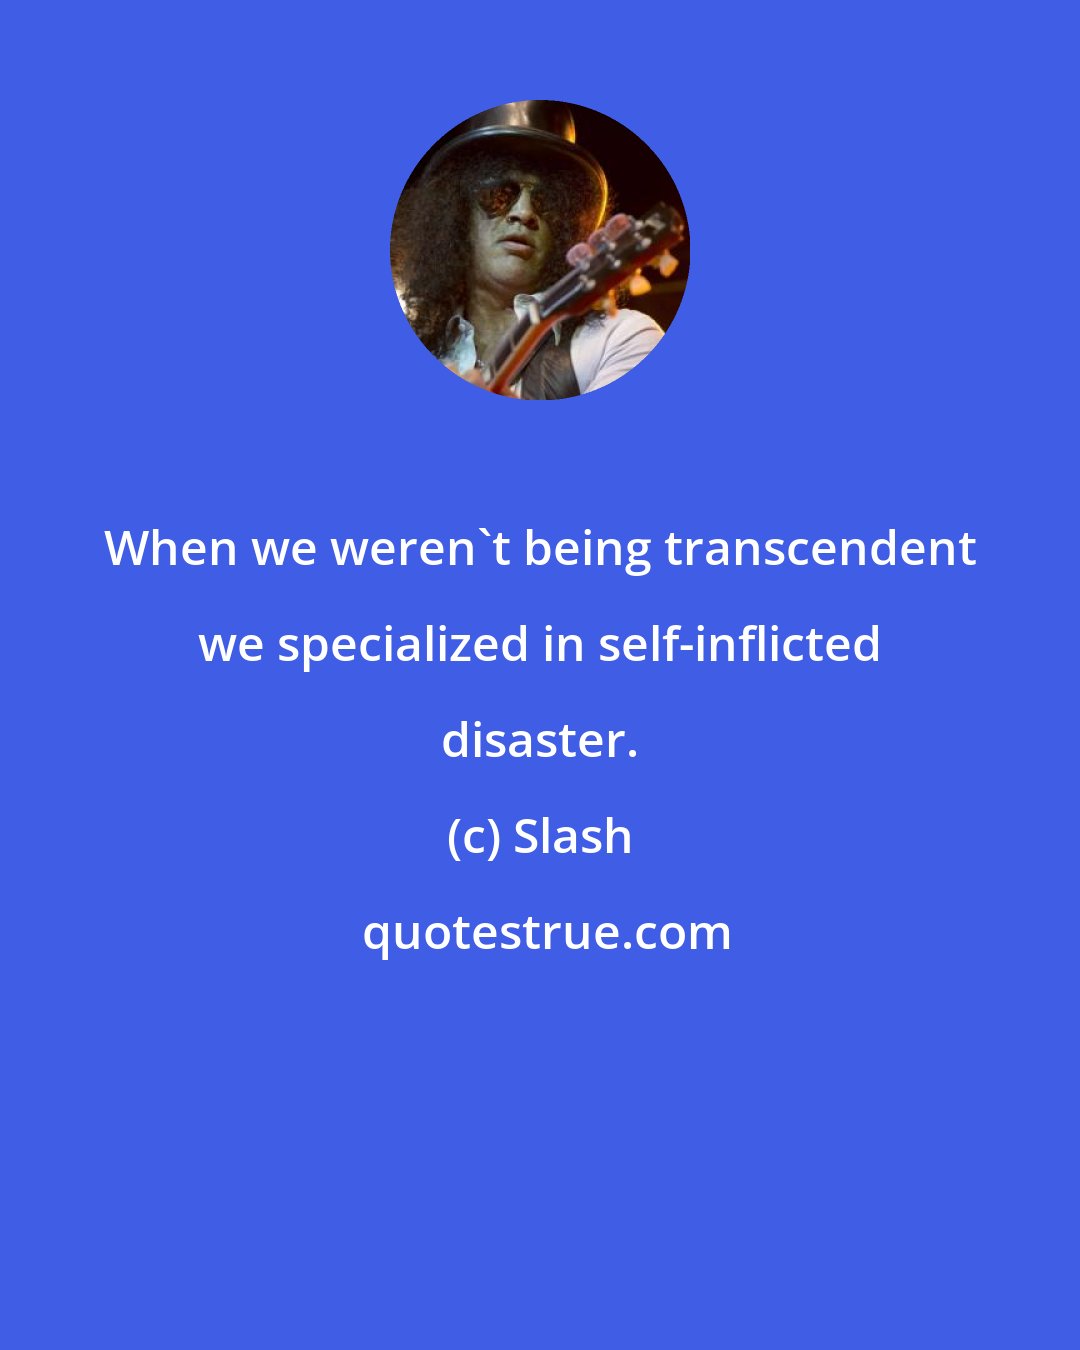 Slash: When we weren't being transcendent we specialized in self-inflicted disaster.